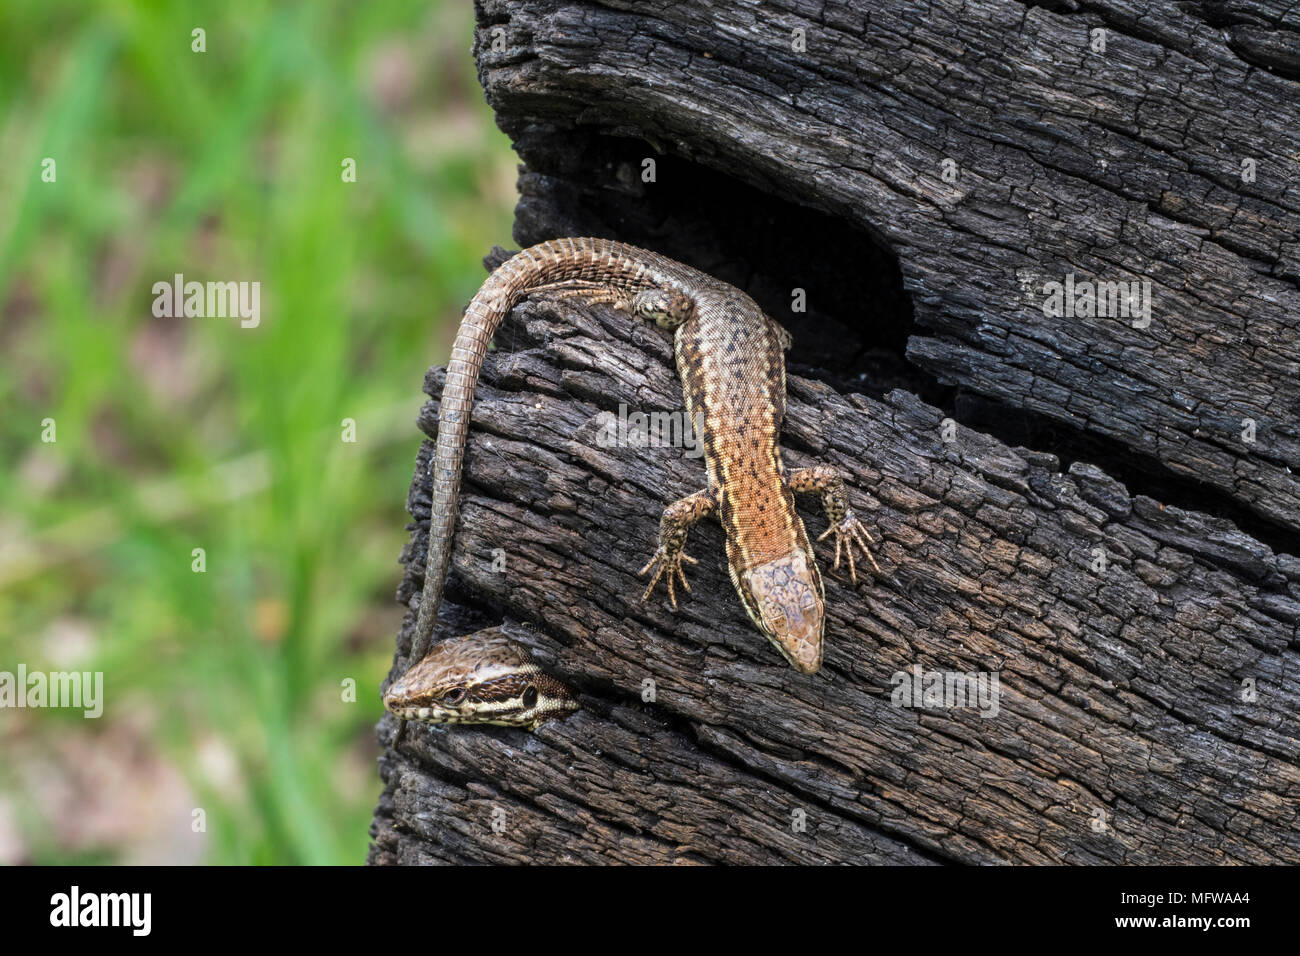 Two common wall lizards (Podarcis muralis / Lacerta muralis) emerging from gaps in scorched tree trunk Stock Photo